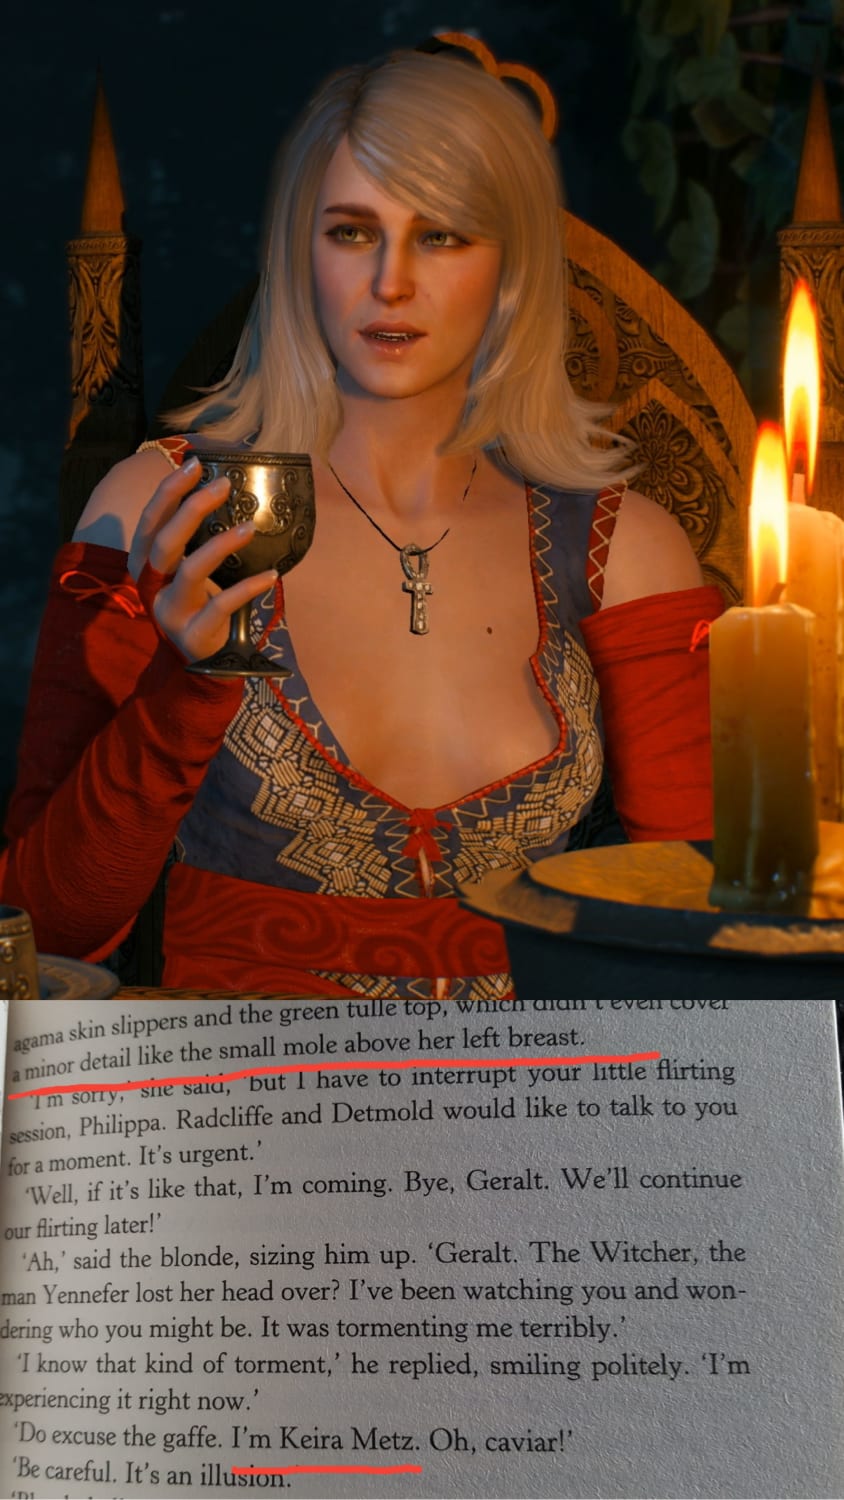 Description of Keira Metz when she meets Geralt on Thanedd and insane attention to detail from CDPR.